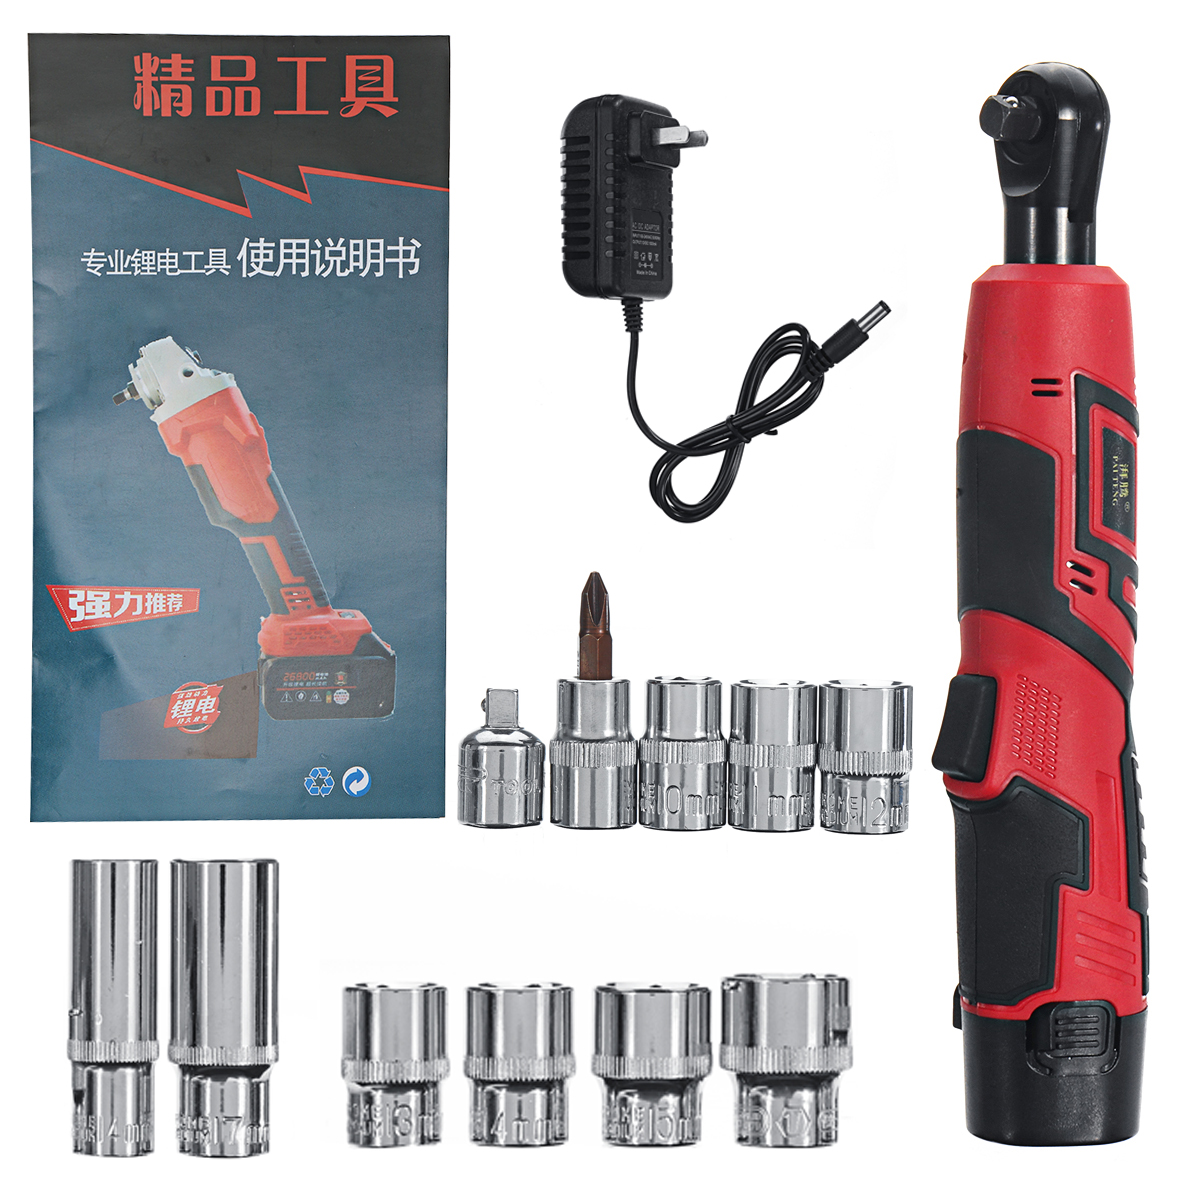 12V-1500mAh-Electric-Ratchet-Wrench-90ordm-Right-Angle-Spanner-Repair-Tools-with-12pcs-Rechargeable--1595087-2